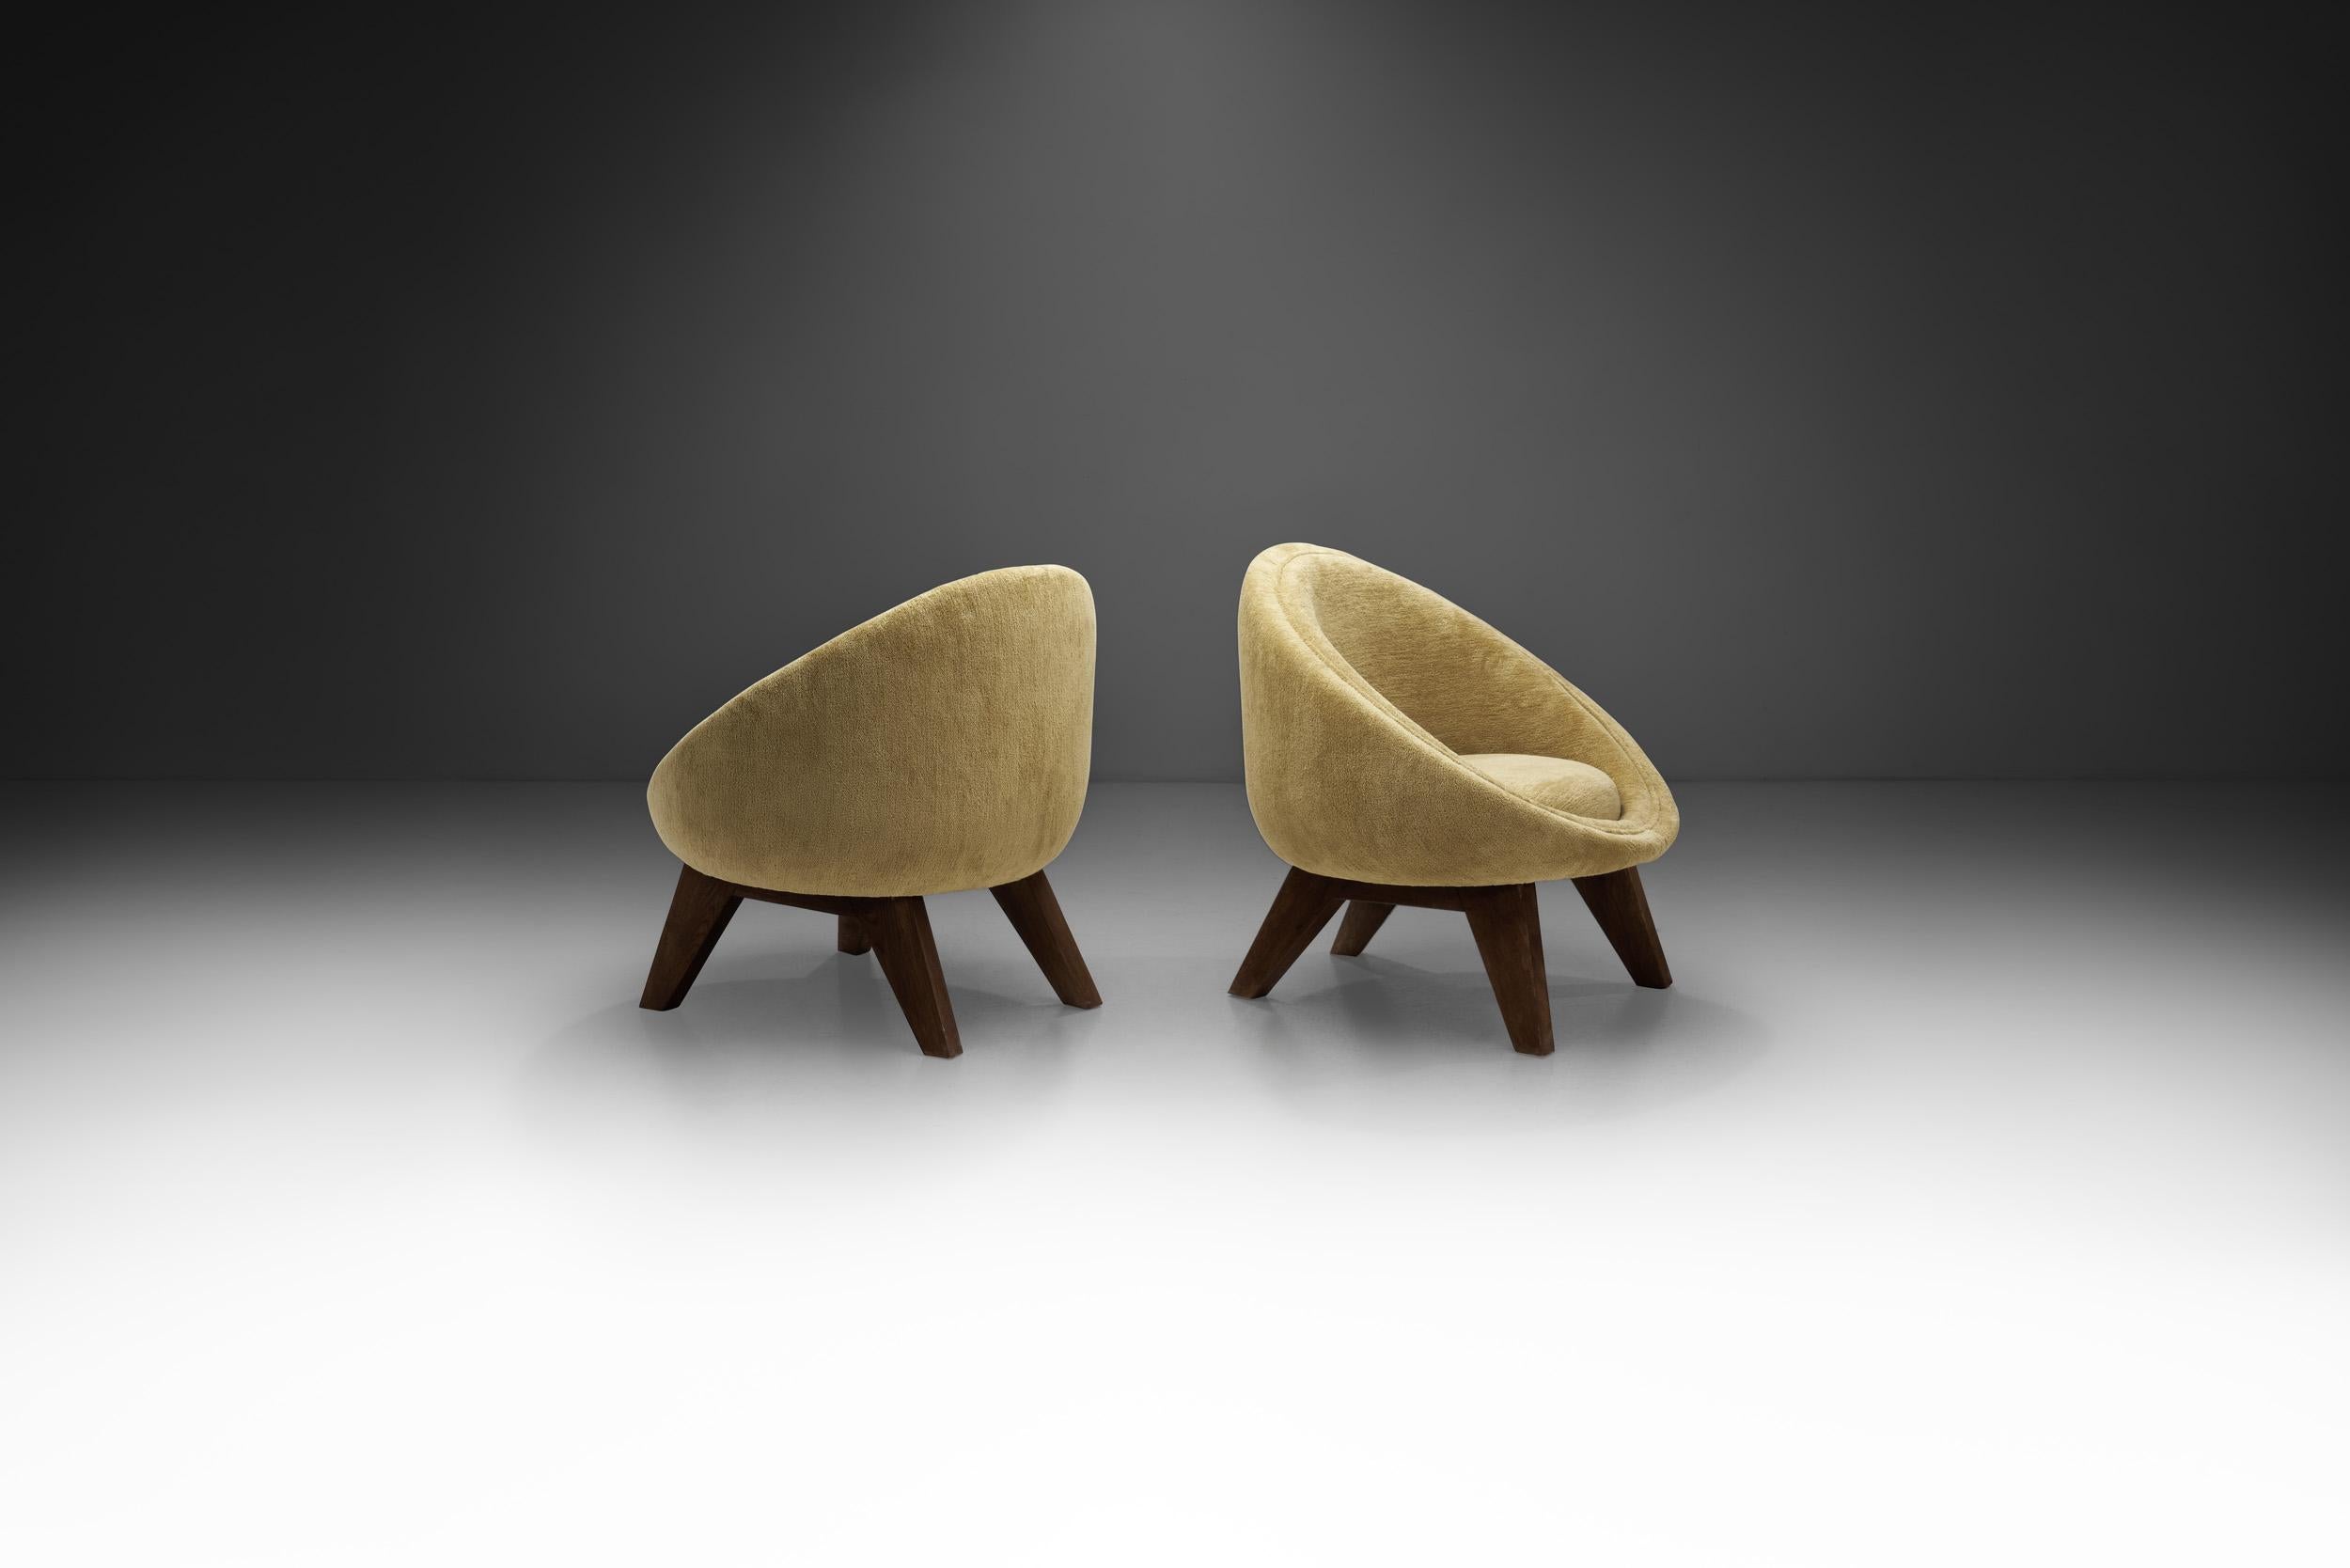 Fabric European Mid-Century Modern Accent Chairs, Europe, 1960s For Sale